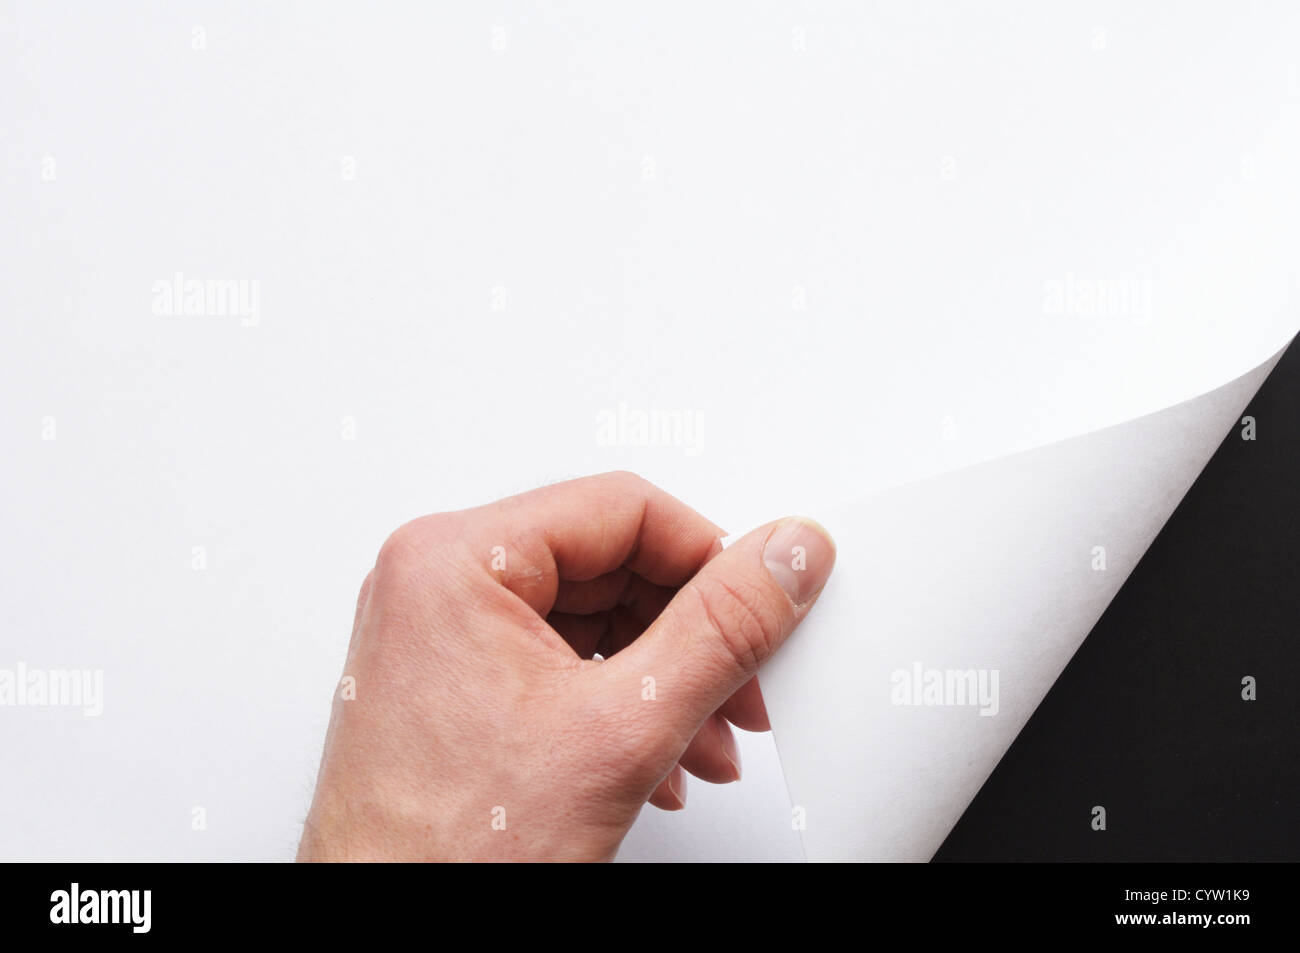 hand turning over blank sheet of paper Stock Photo